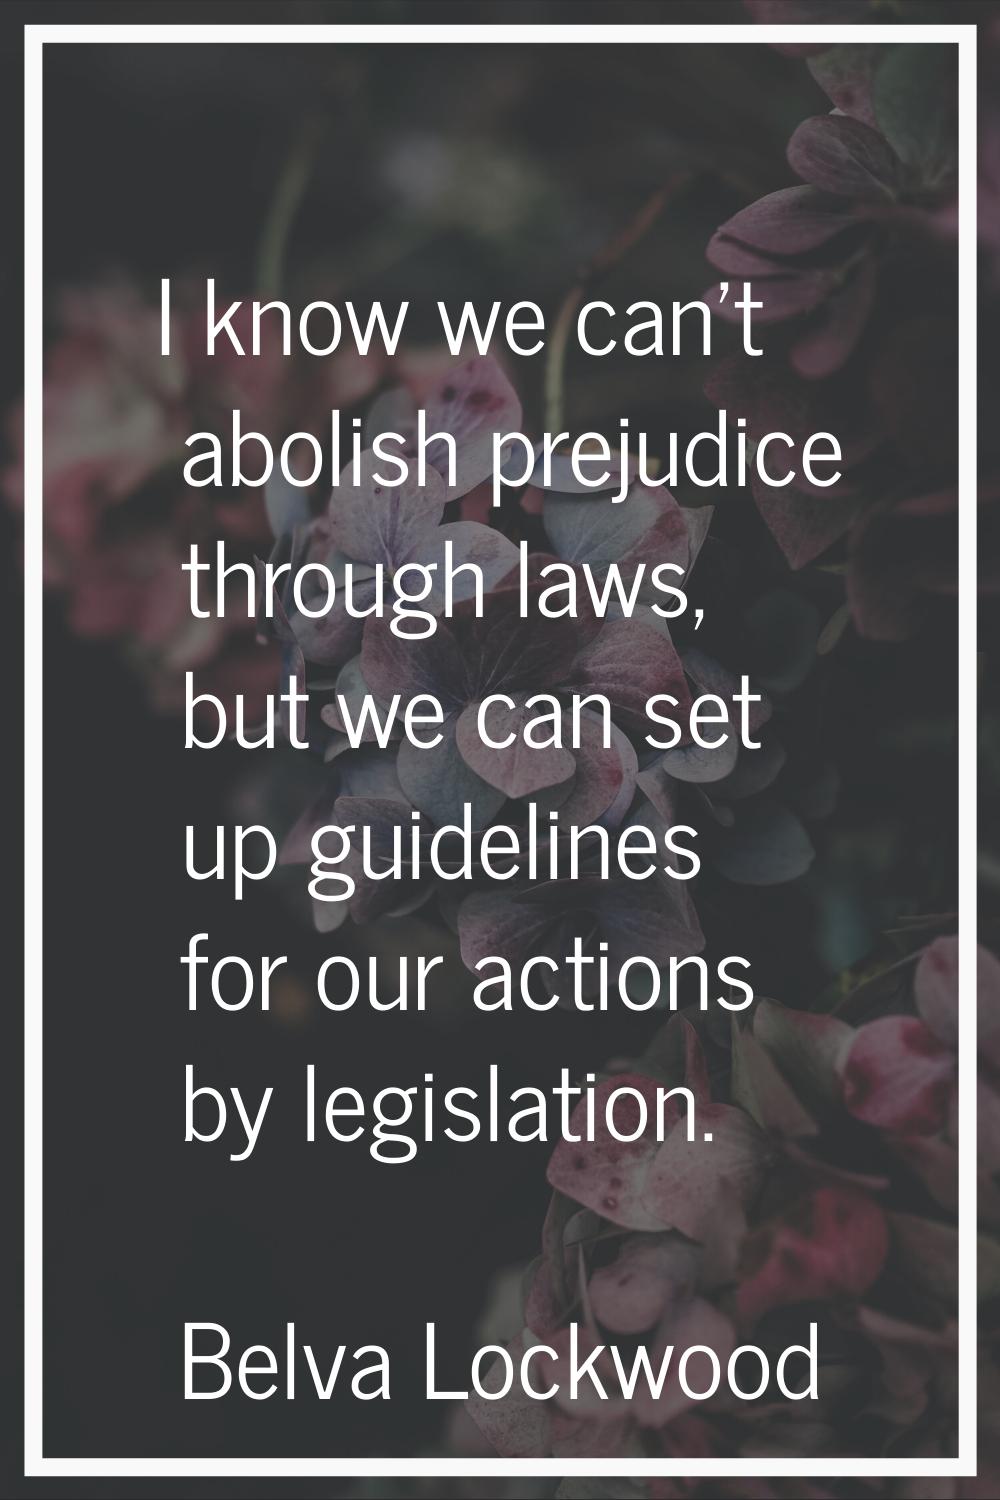 I know we can't abolish prejudice through laws, but we can set up guidelines for our actions by leg